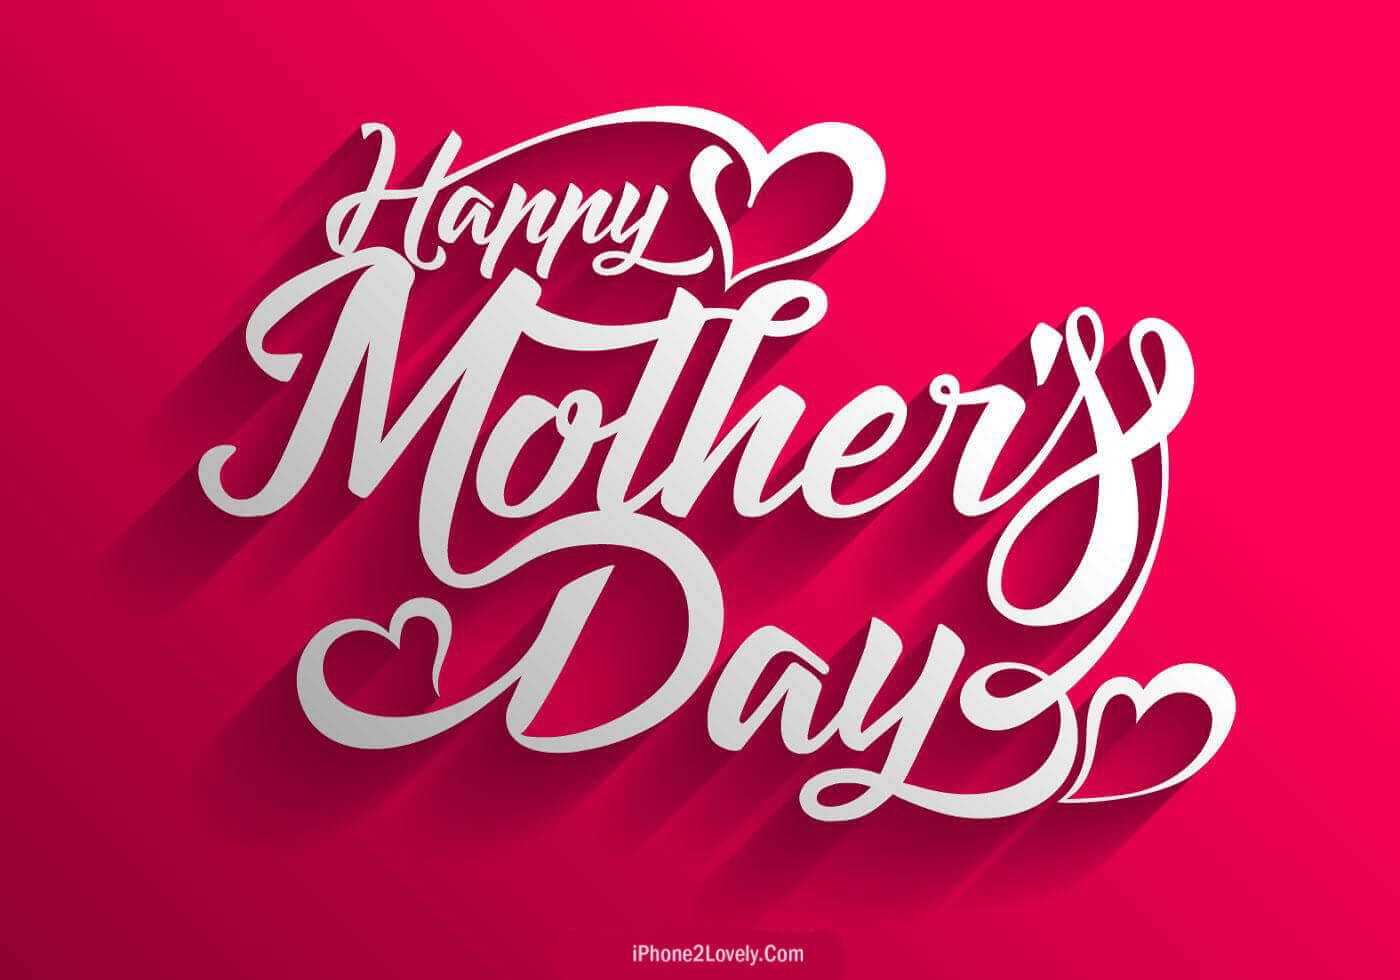 Happy Mothers Day Image Mothers Day Vectors